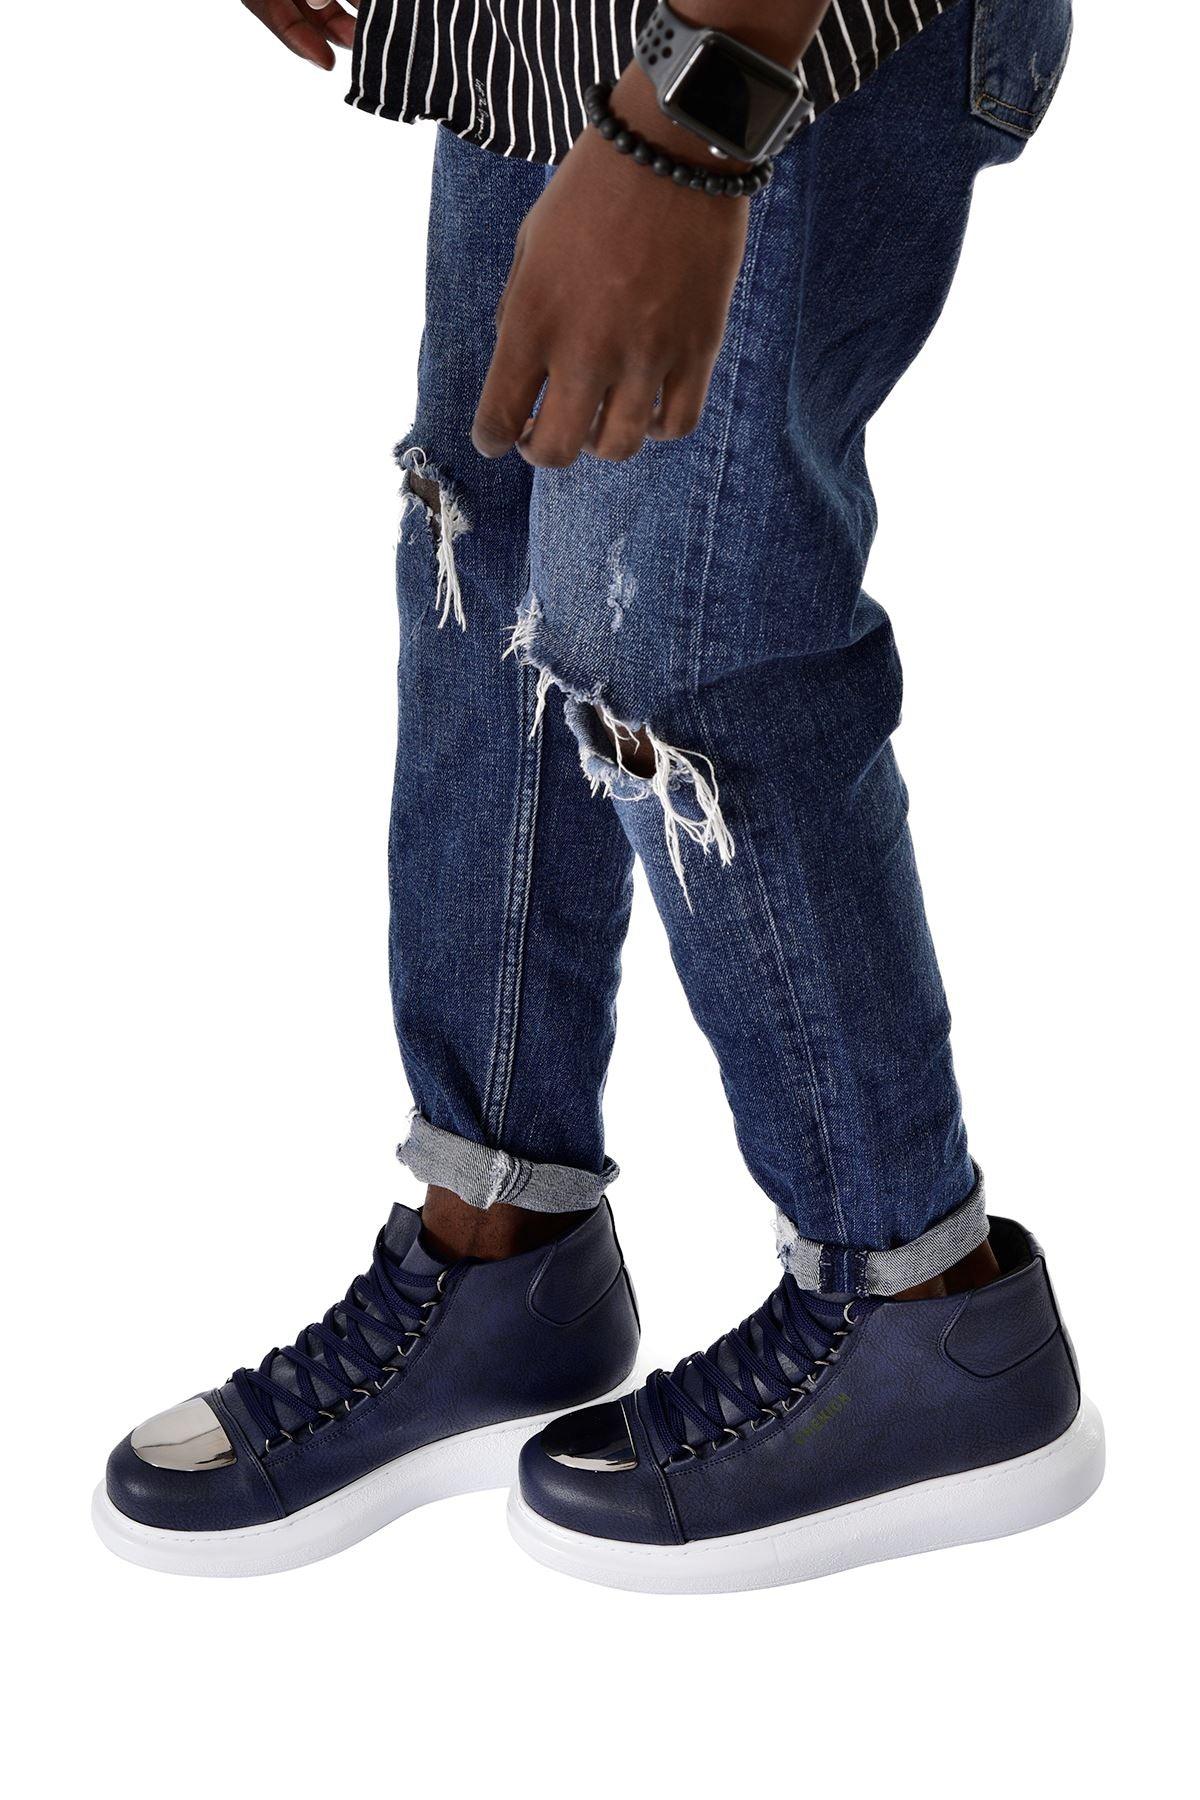 CH267 Men's shoes sneakers Boots BLUE - STREET MODE ™